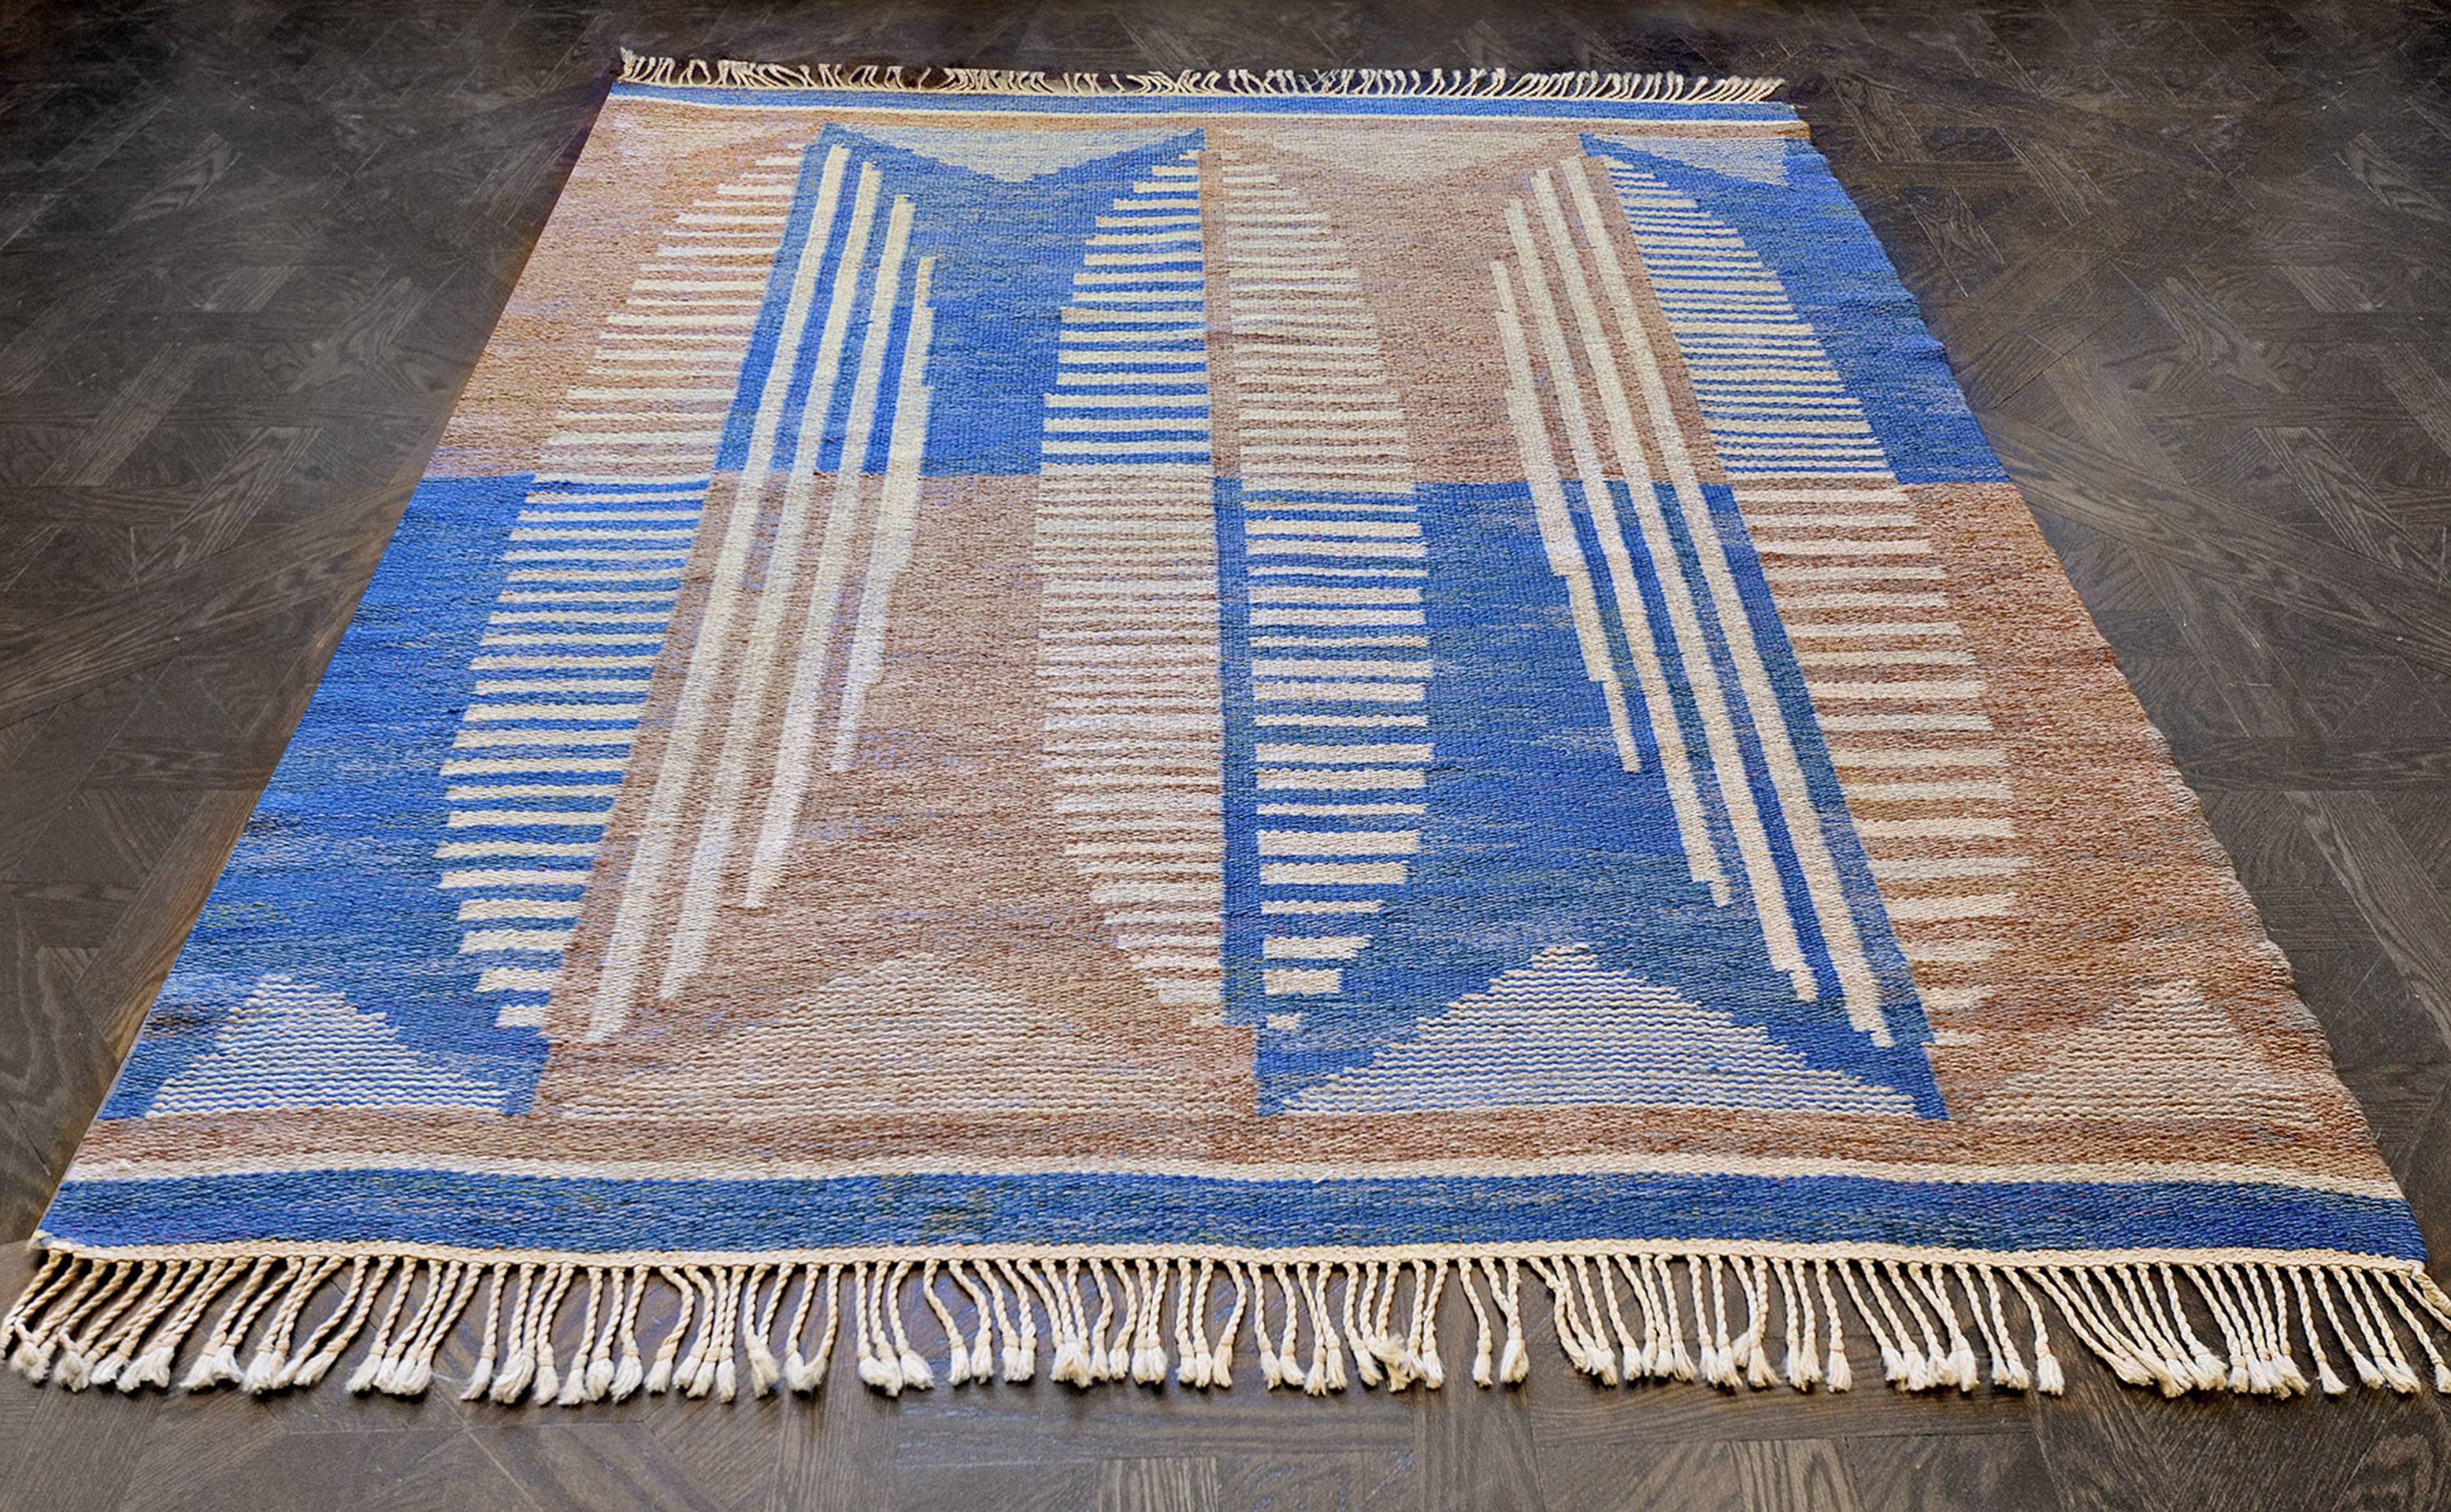 This vintage handwoven Swedish Deco rug has a checkered field of broad refined sapphire and shaded almond-brown cells overlaid by broad oblong lozenges of parallel and perpendicular rectangle motif, plain opposing sapphire stripes.